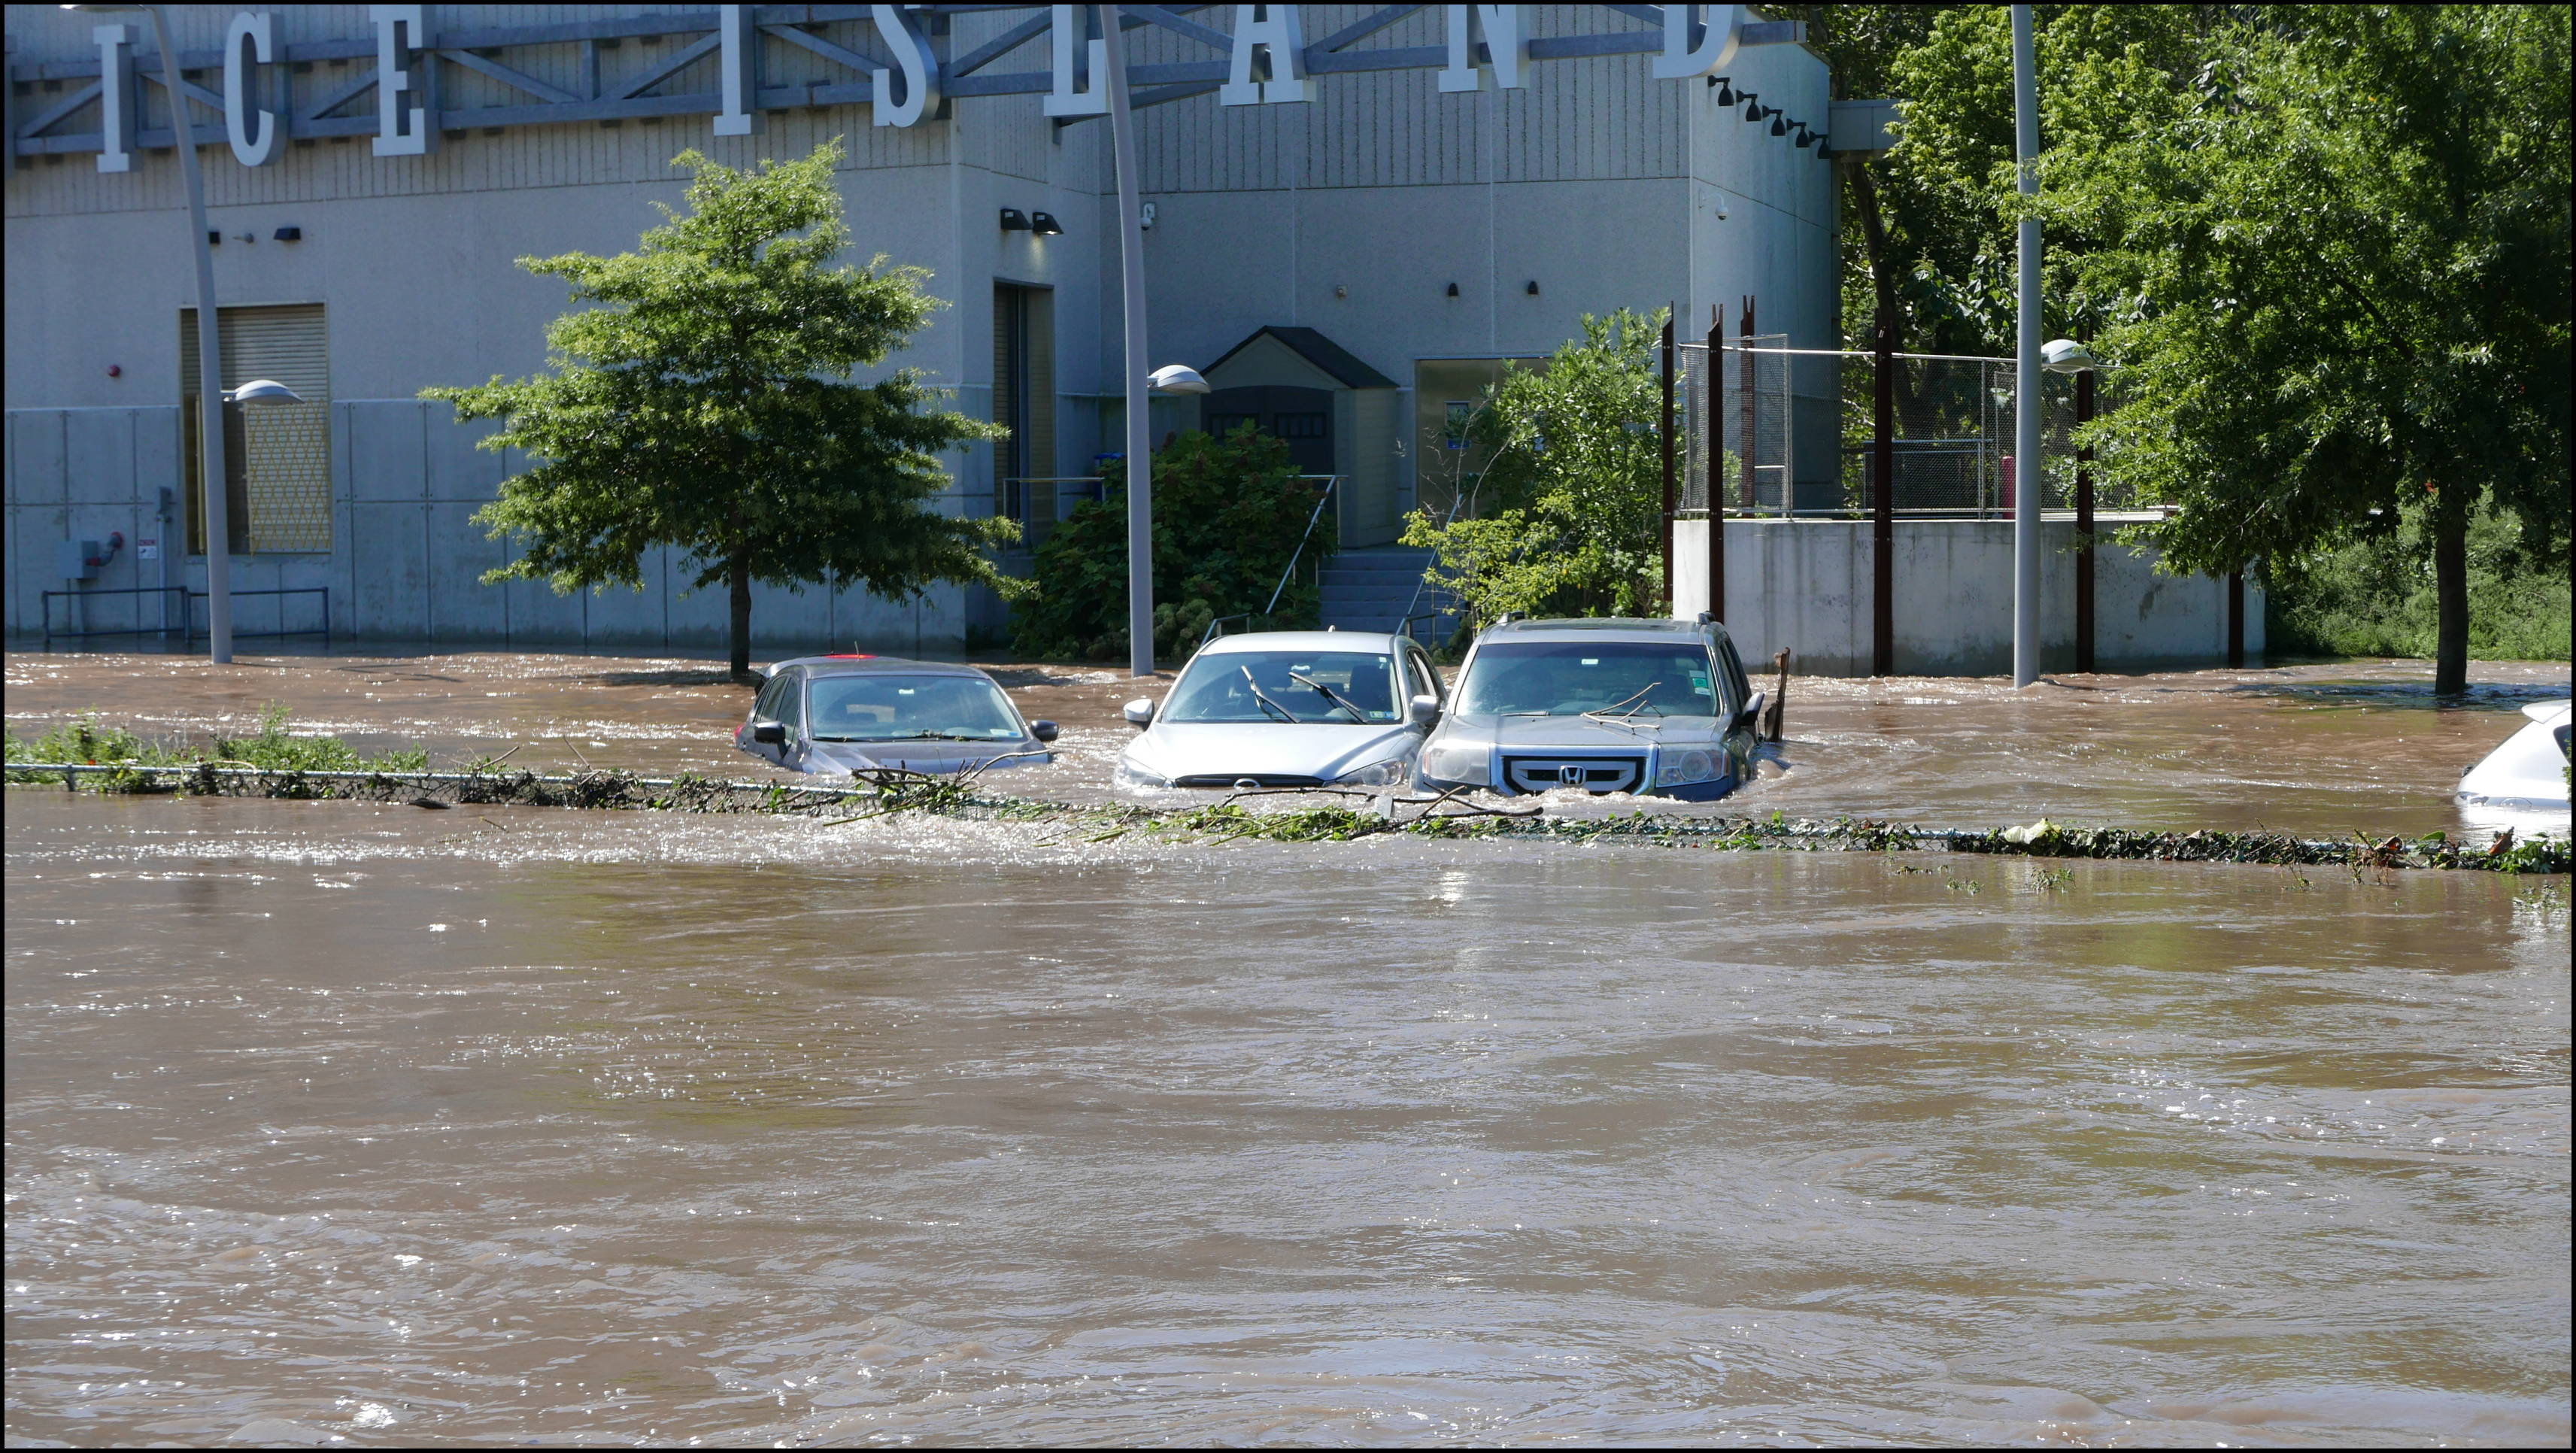 Cotton Street and the canal -- Flooded cars in the Rec Center parking lot